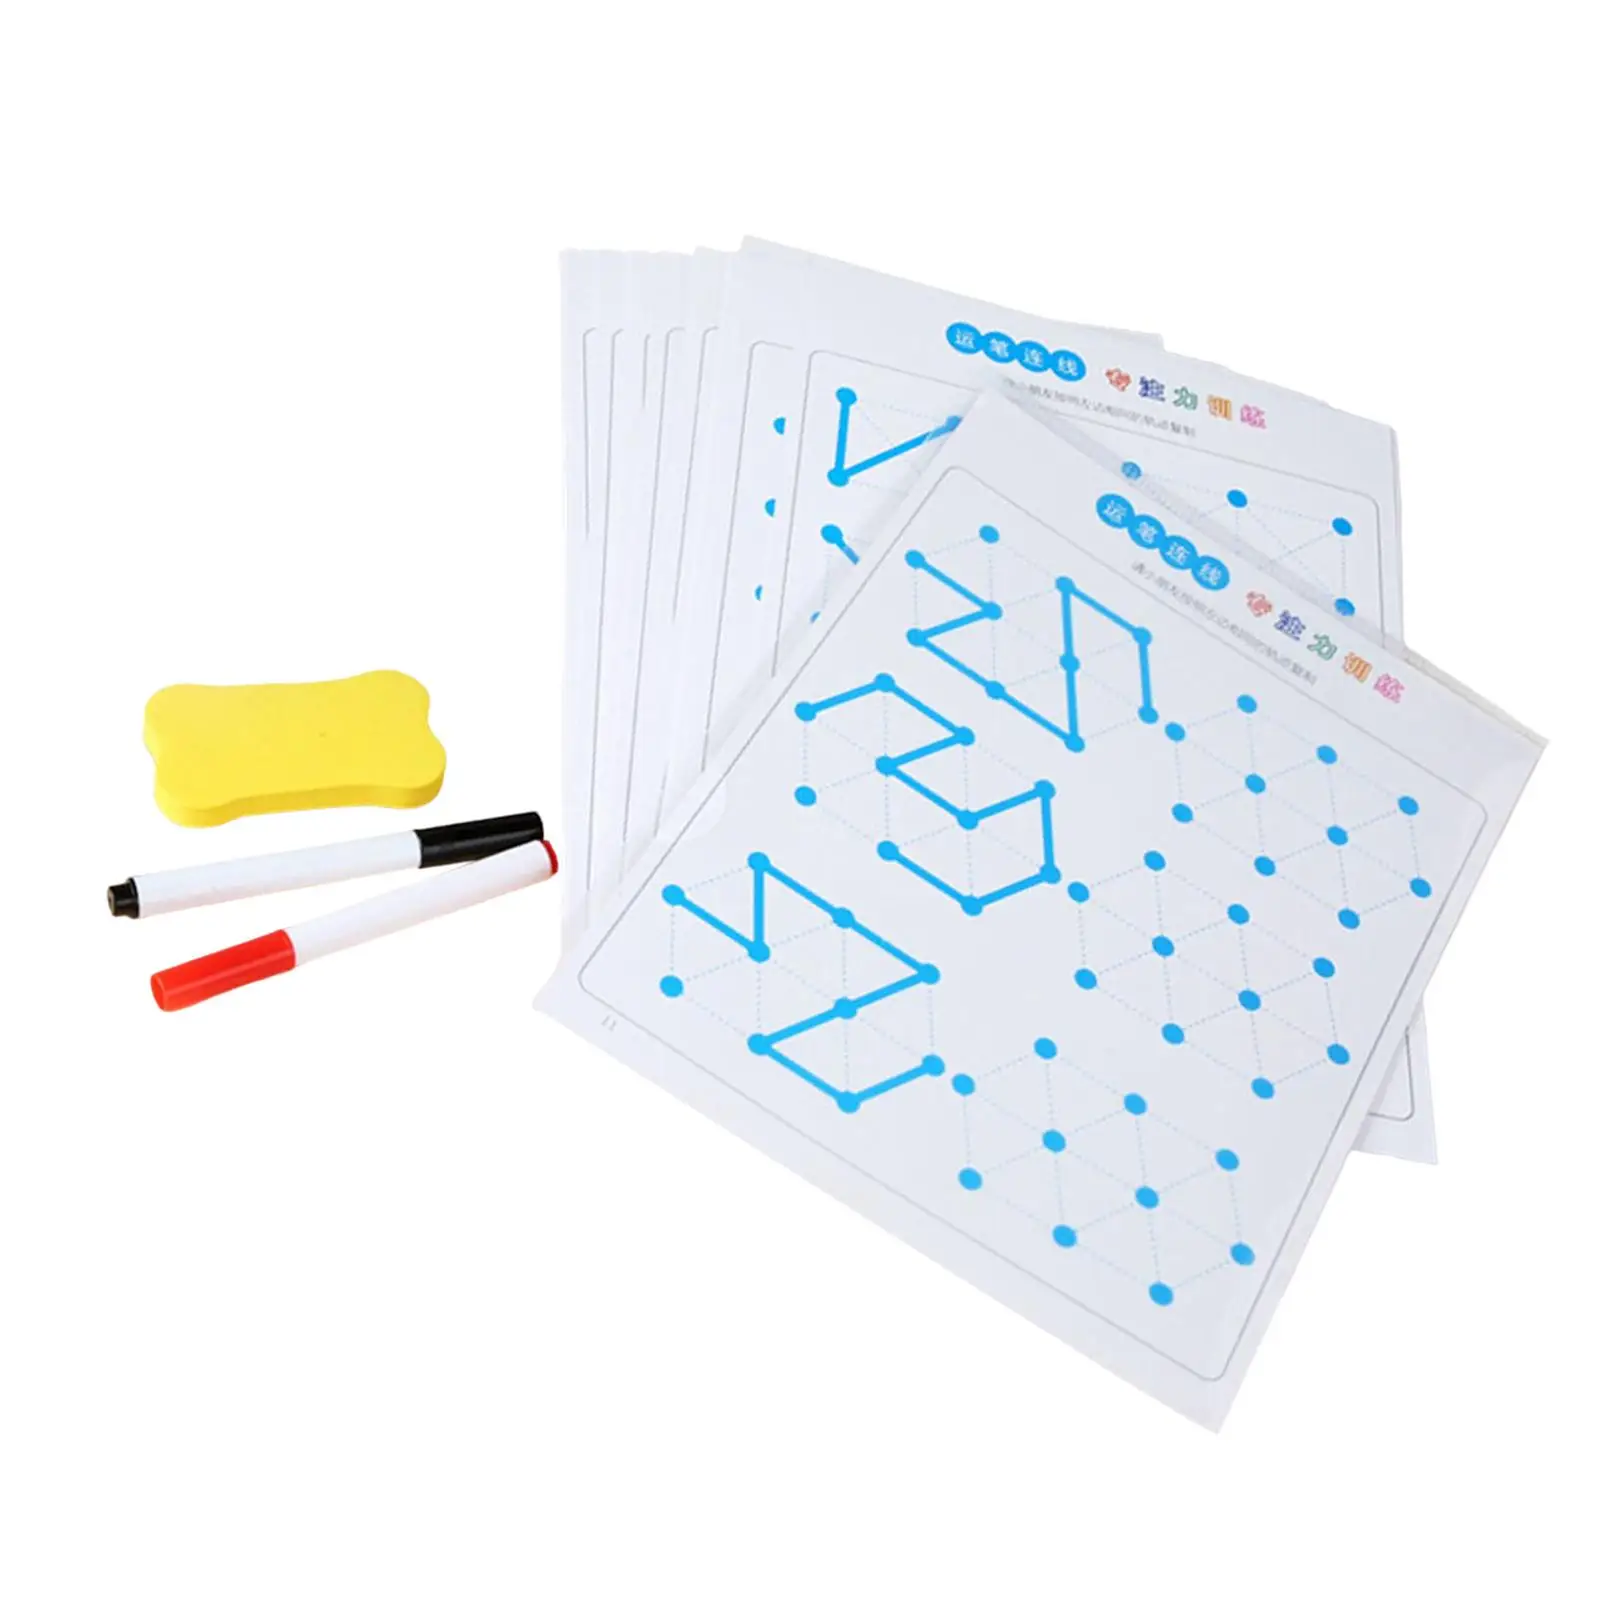 24Pcs Pen Control Line Tracing Cards Wipe cute for Activities Training